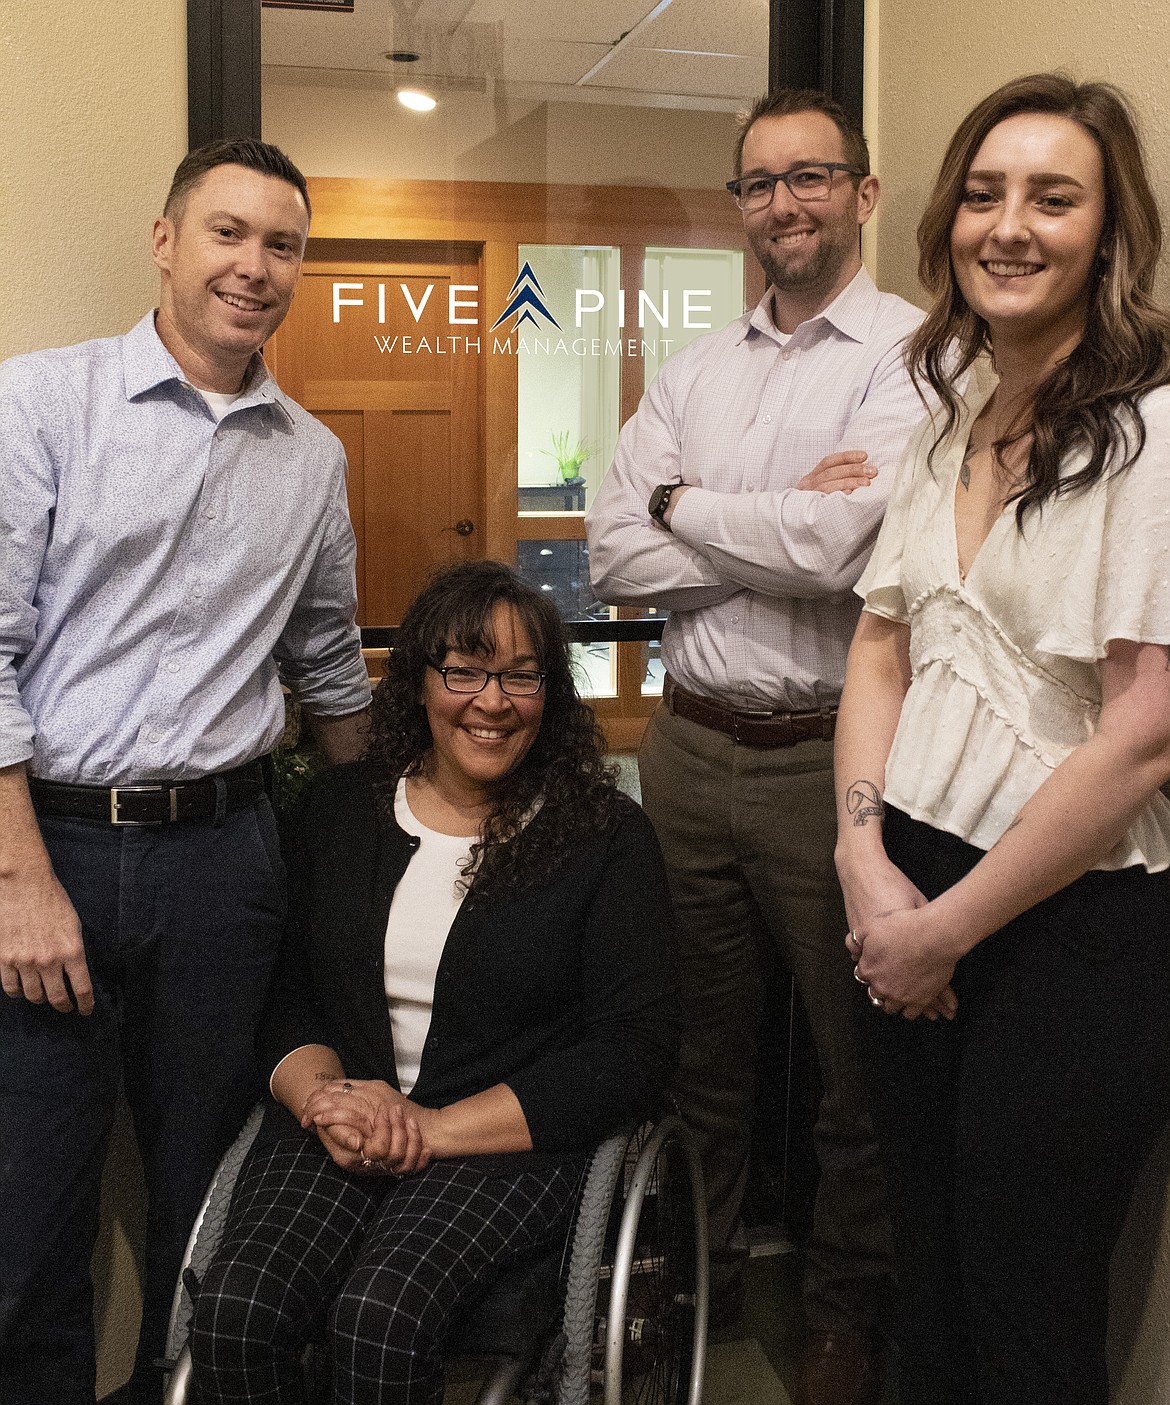 Courtesy photo
Five Pine Wealth Management employees, from left, Jeremy Morris, Sherrie Petersen, Ben Holzhauser and Cheyanne Ross, pose in their new office on Sherman Avenue (located above the Coeur d'Alene Resort Shops).